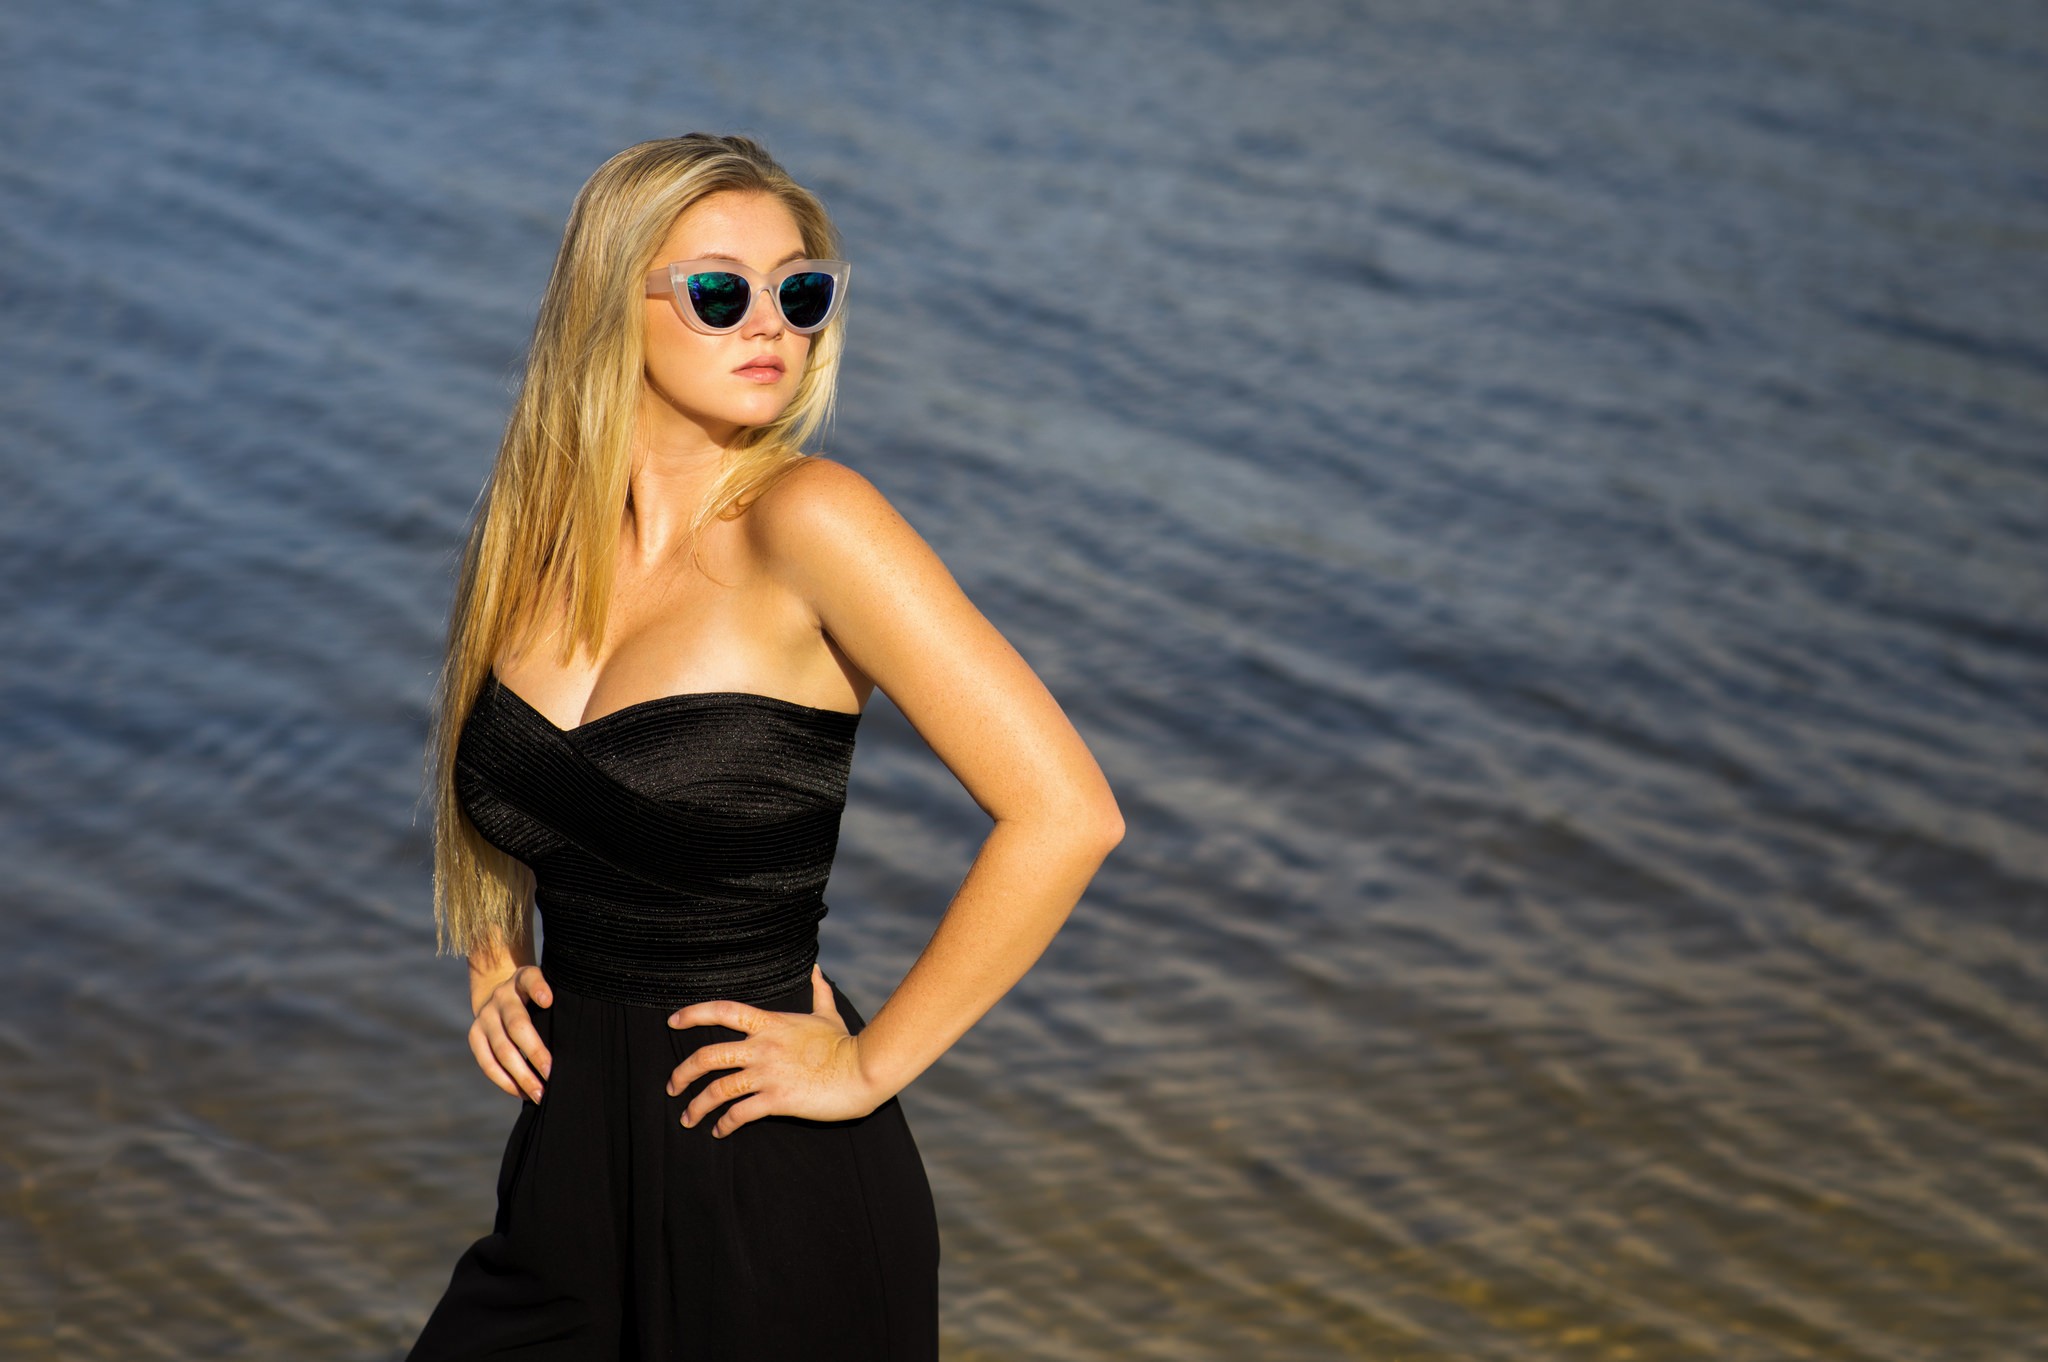 People 2048x1362 women outdoors water women with glasses long hair bare shoulders dress black dress cleavage hands on hips blonde looking away Ri Hane Christopher Rankin women with shades sunglasses black clothing model women